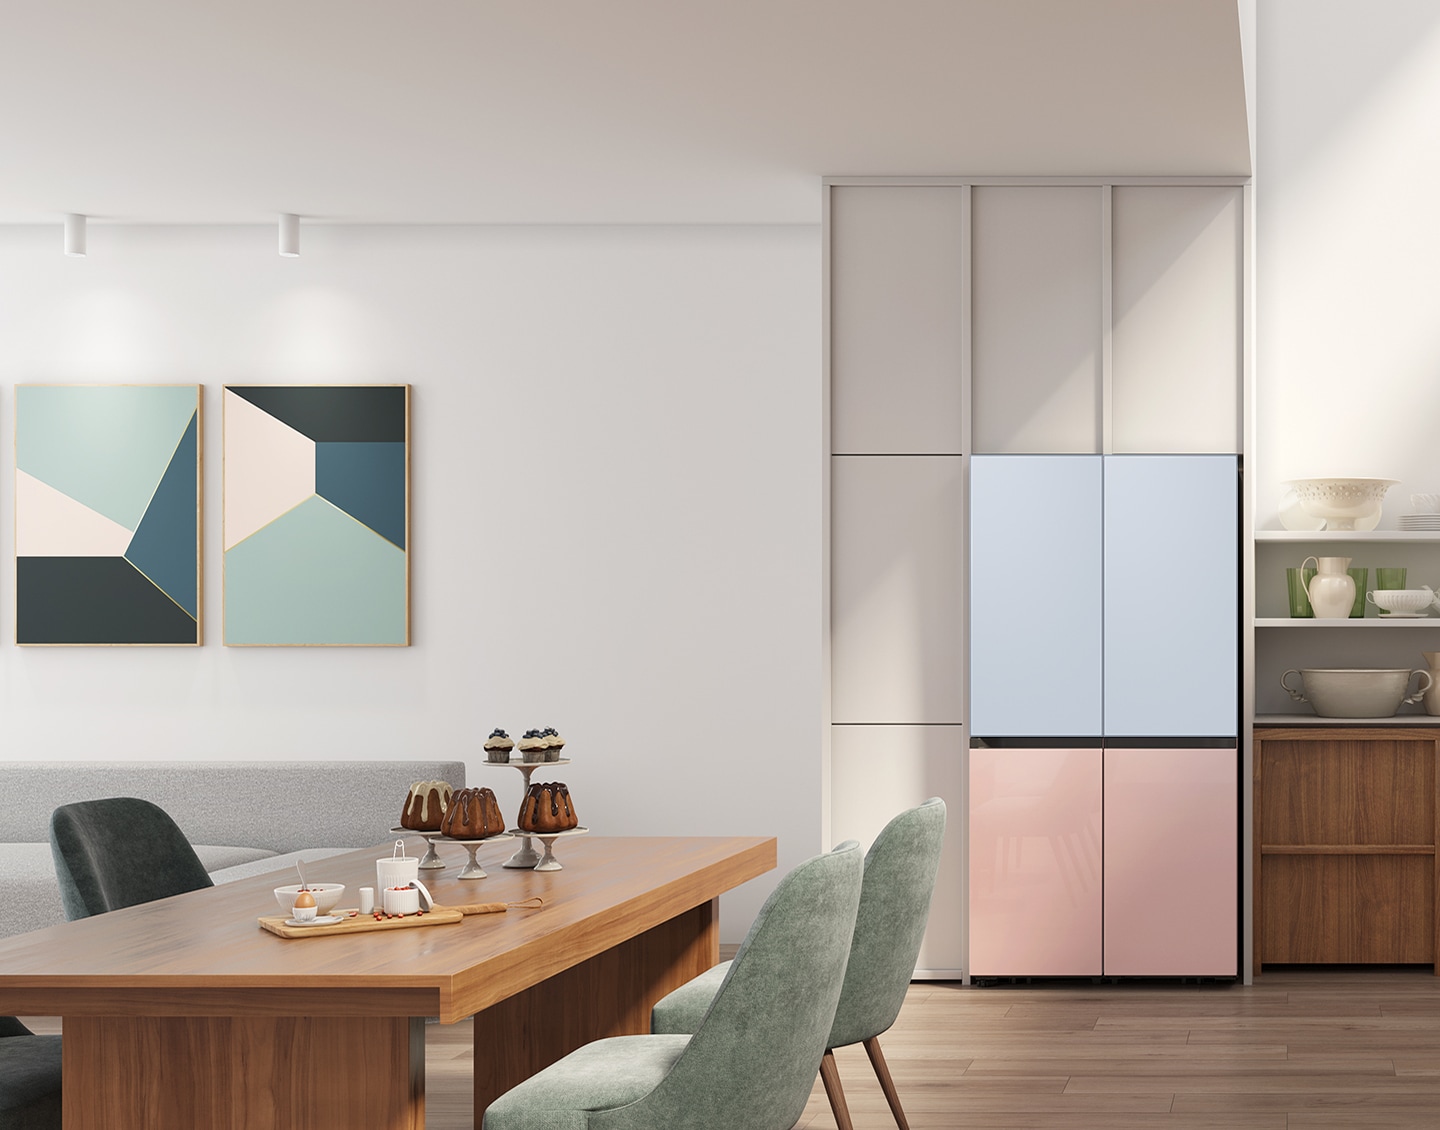 The sleek exterior of the fridge gives a clean look to the modern kitchen, with a flat finish and no recessed handles.